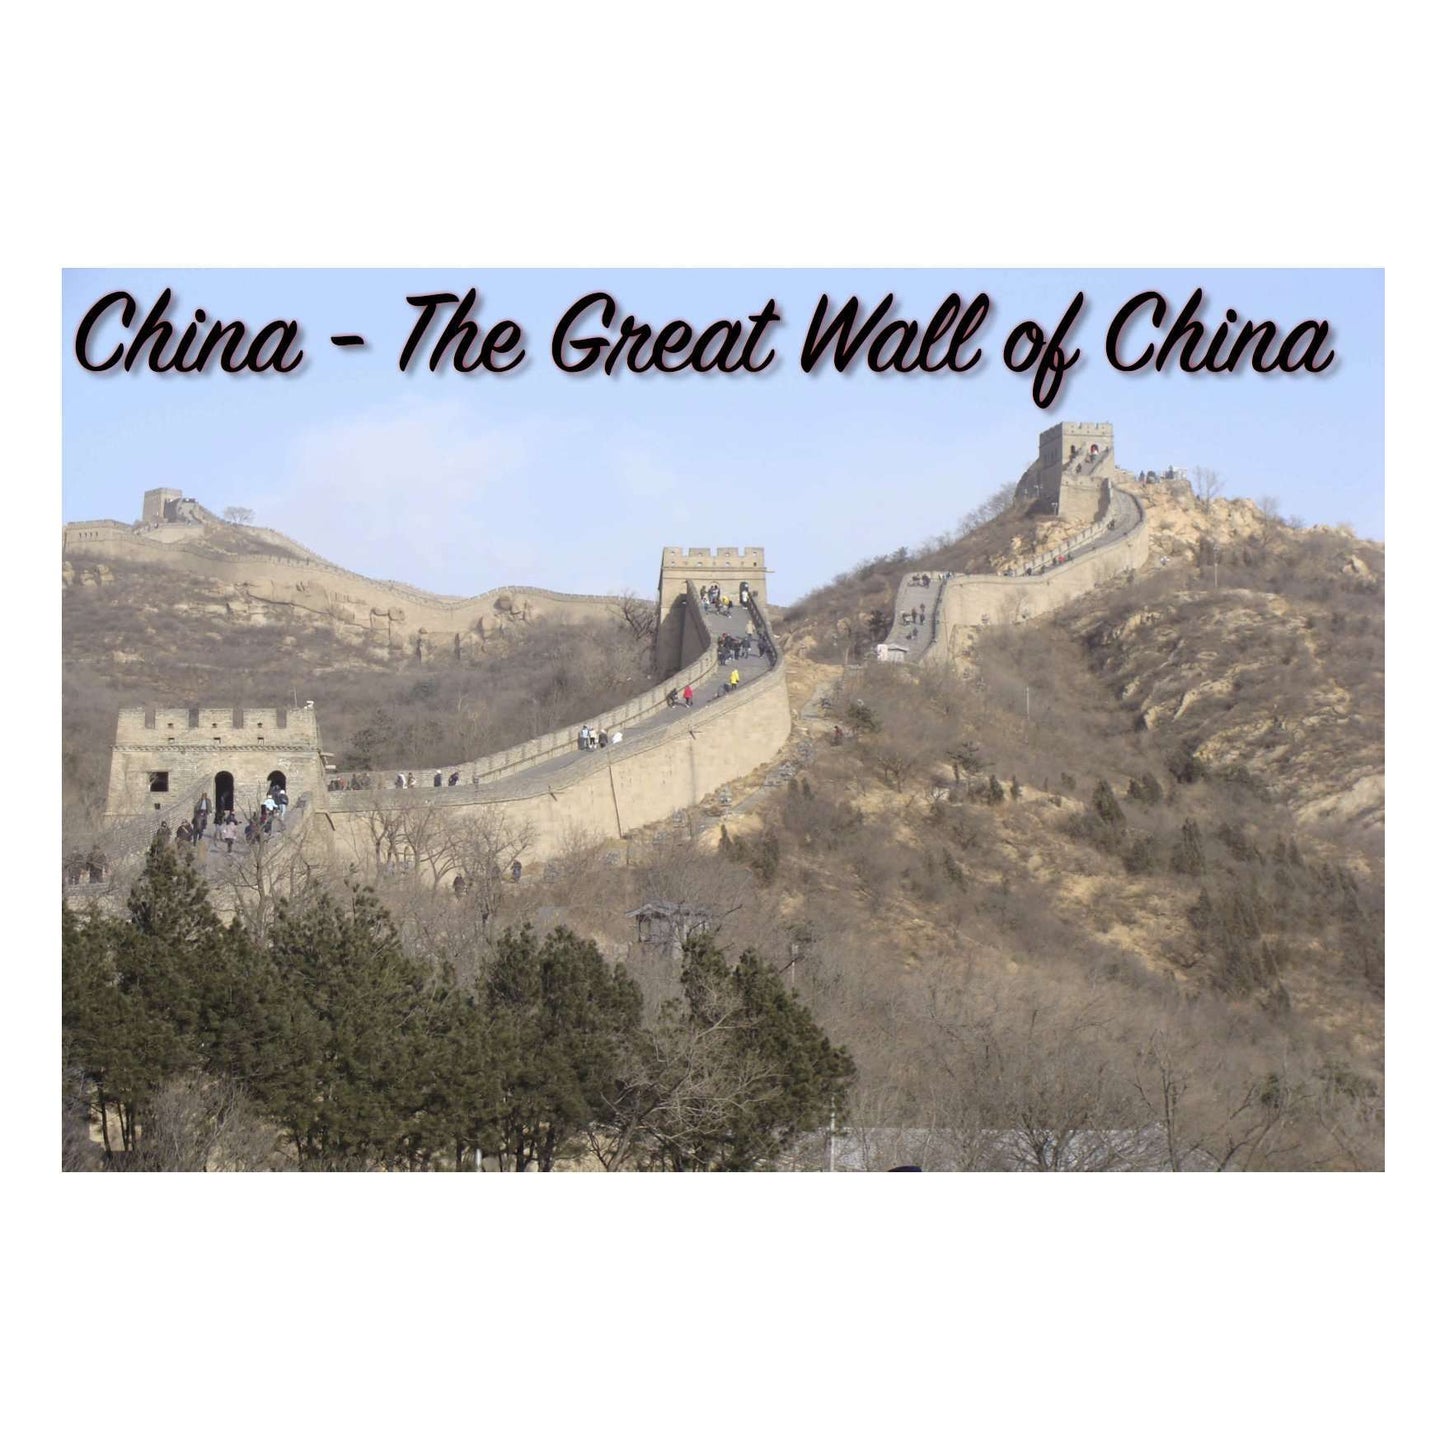 Postcards from Tom China:Primary Classroom Resources